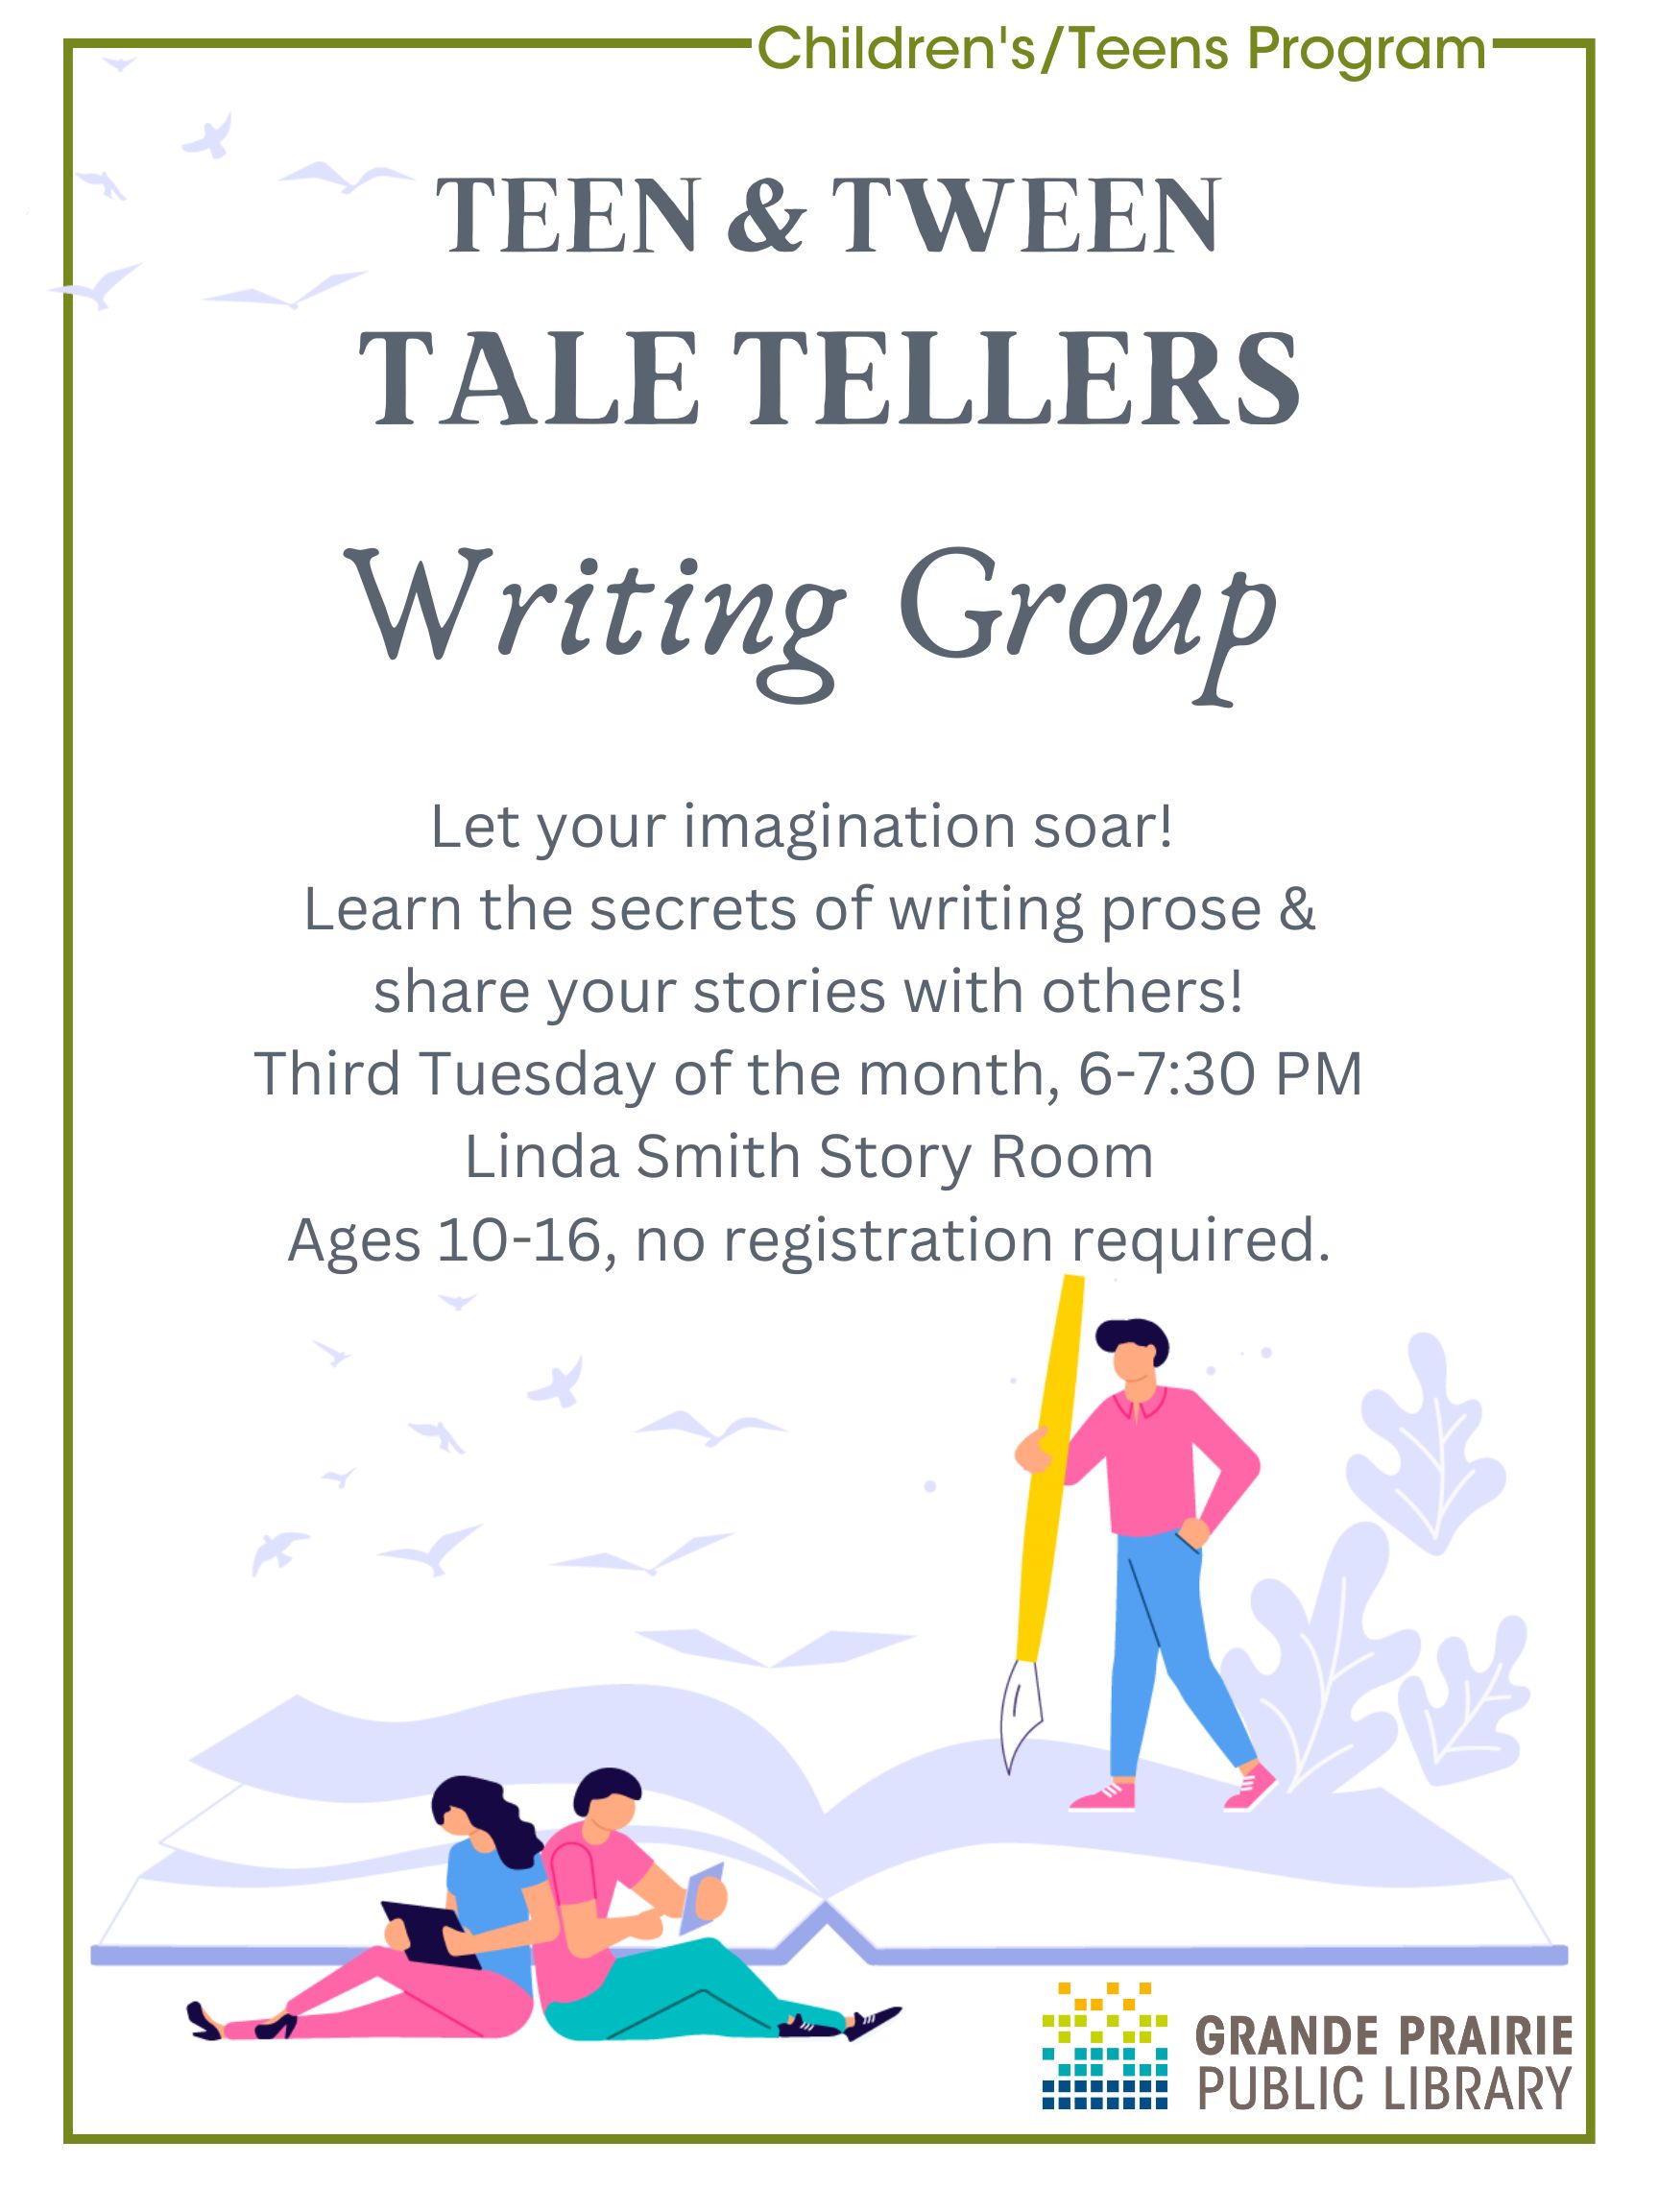 Poster for the program Teen and Tween Tale Tellers which happens the third Tuesday of the month from 6 to 7:30 pm in the Linda Smith Story Room. This program is for ages 10 to 16.